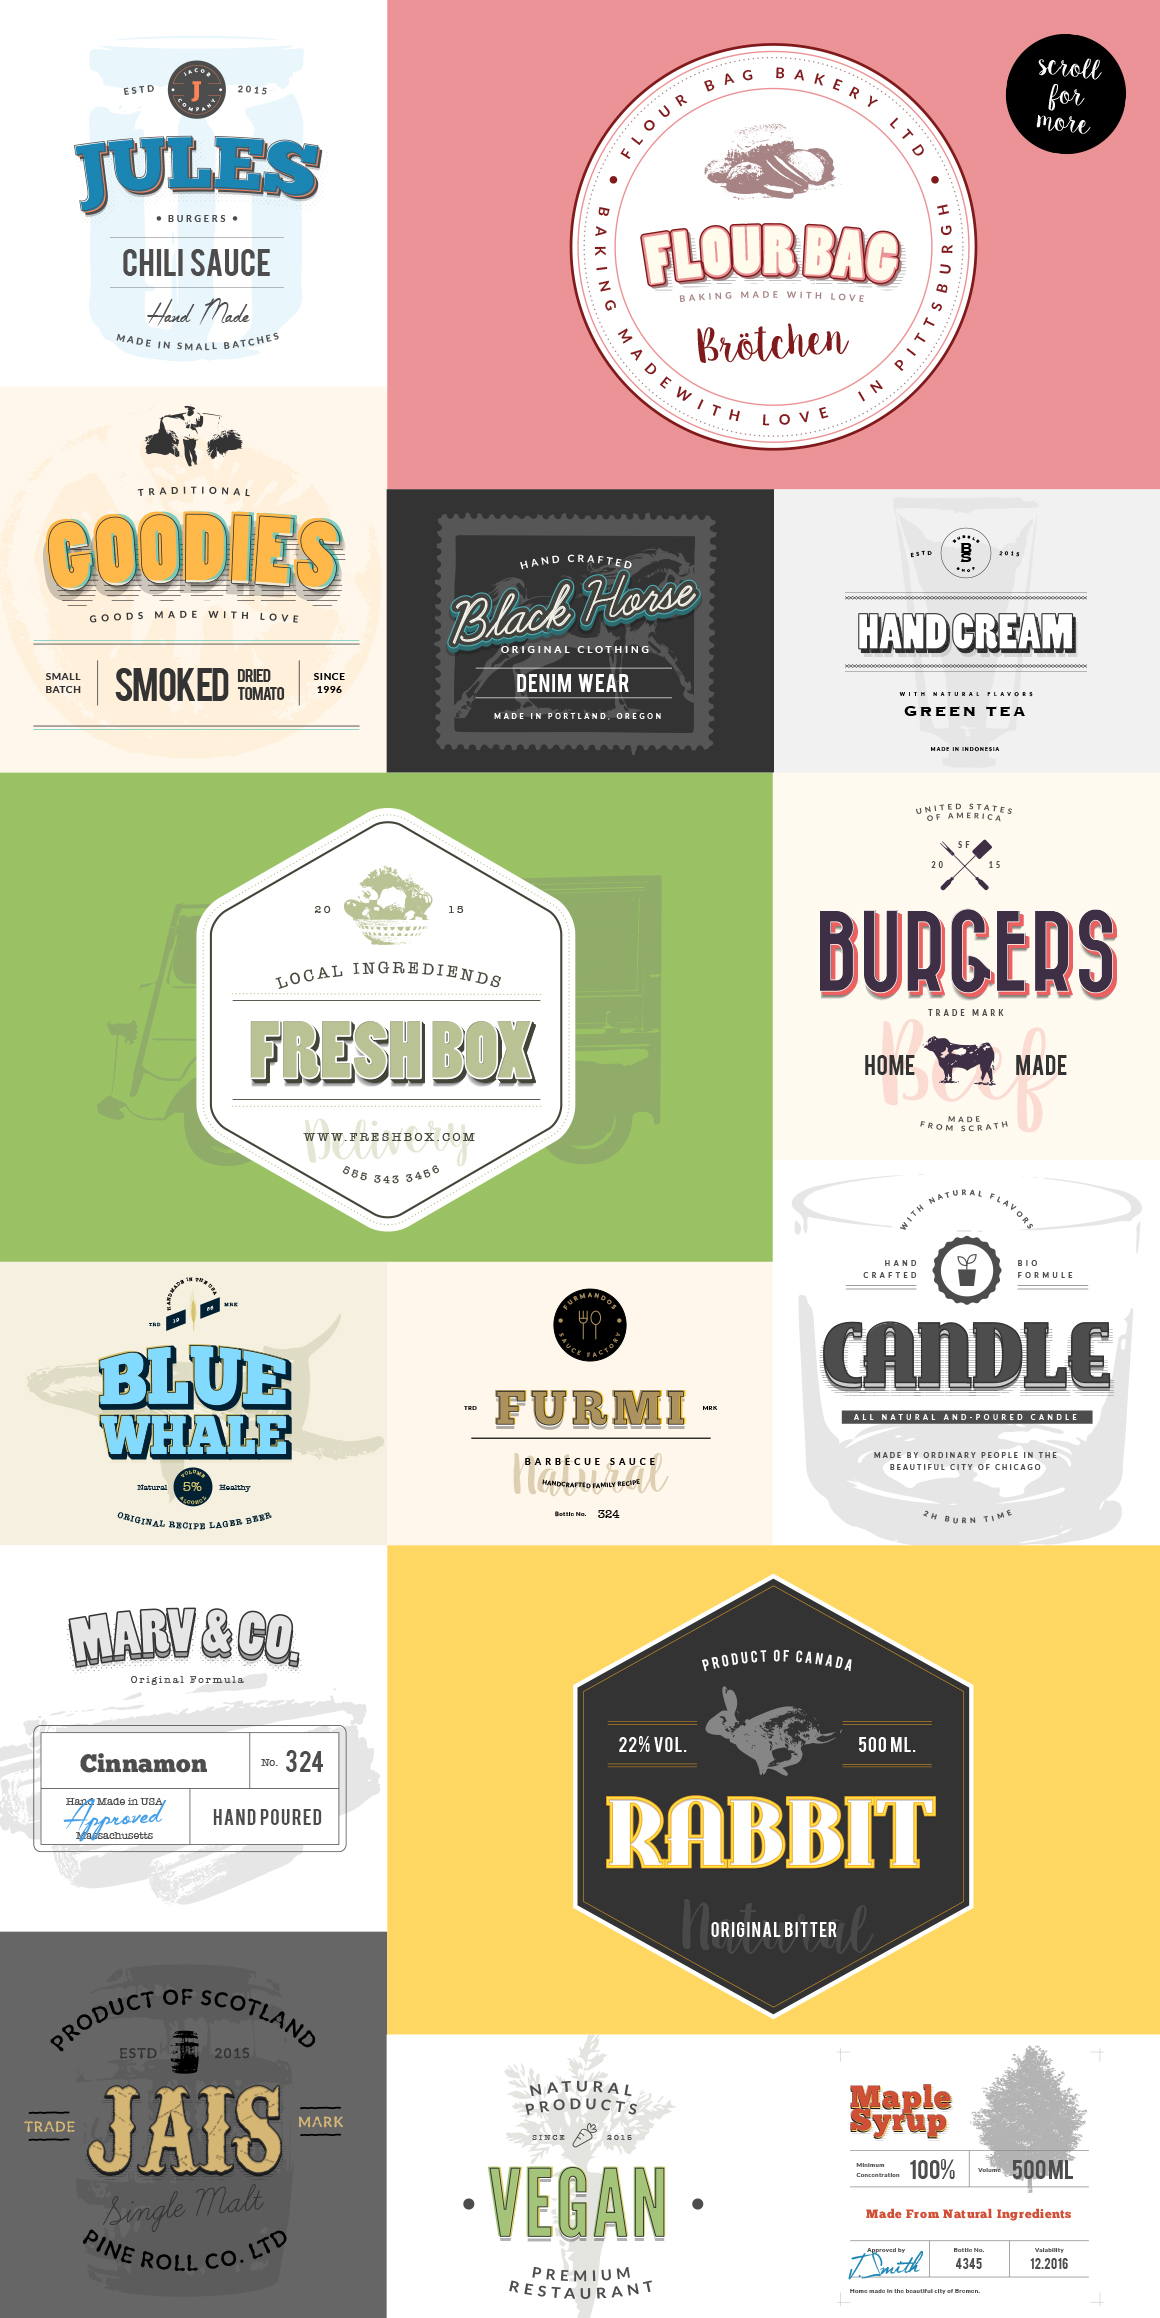 STYLOR - Styles, Labels & Badges No2 ~ Layer Styles on Creative Market